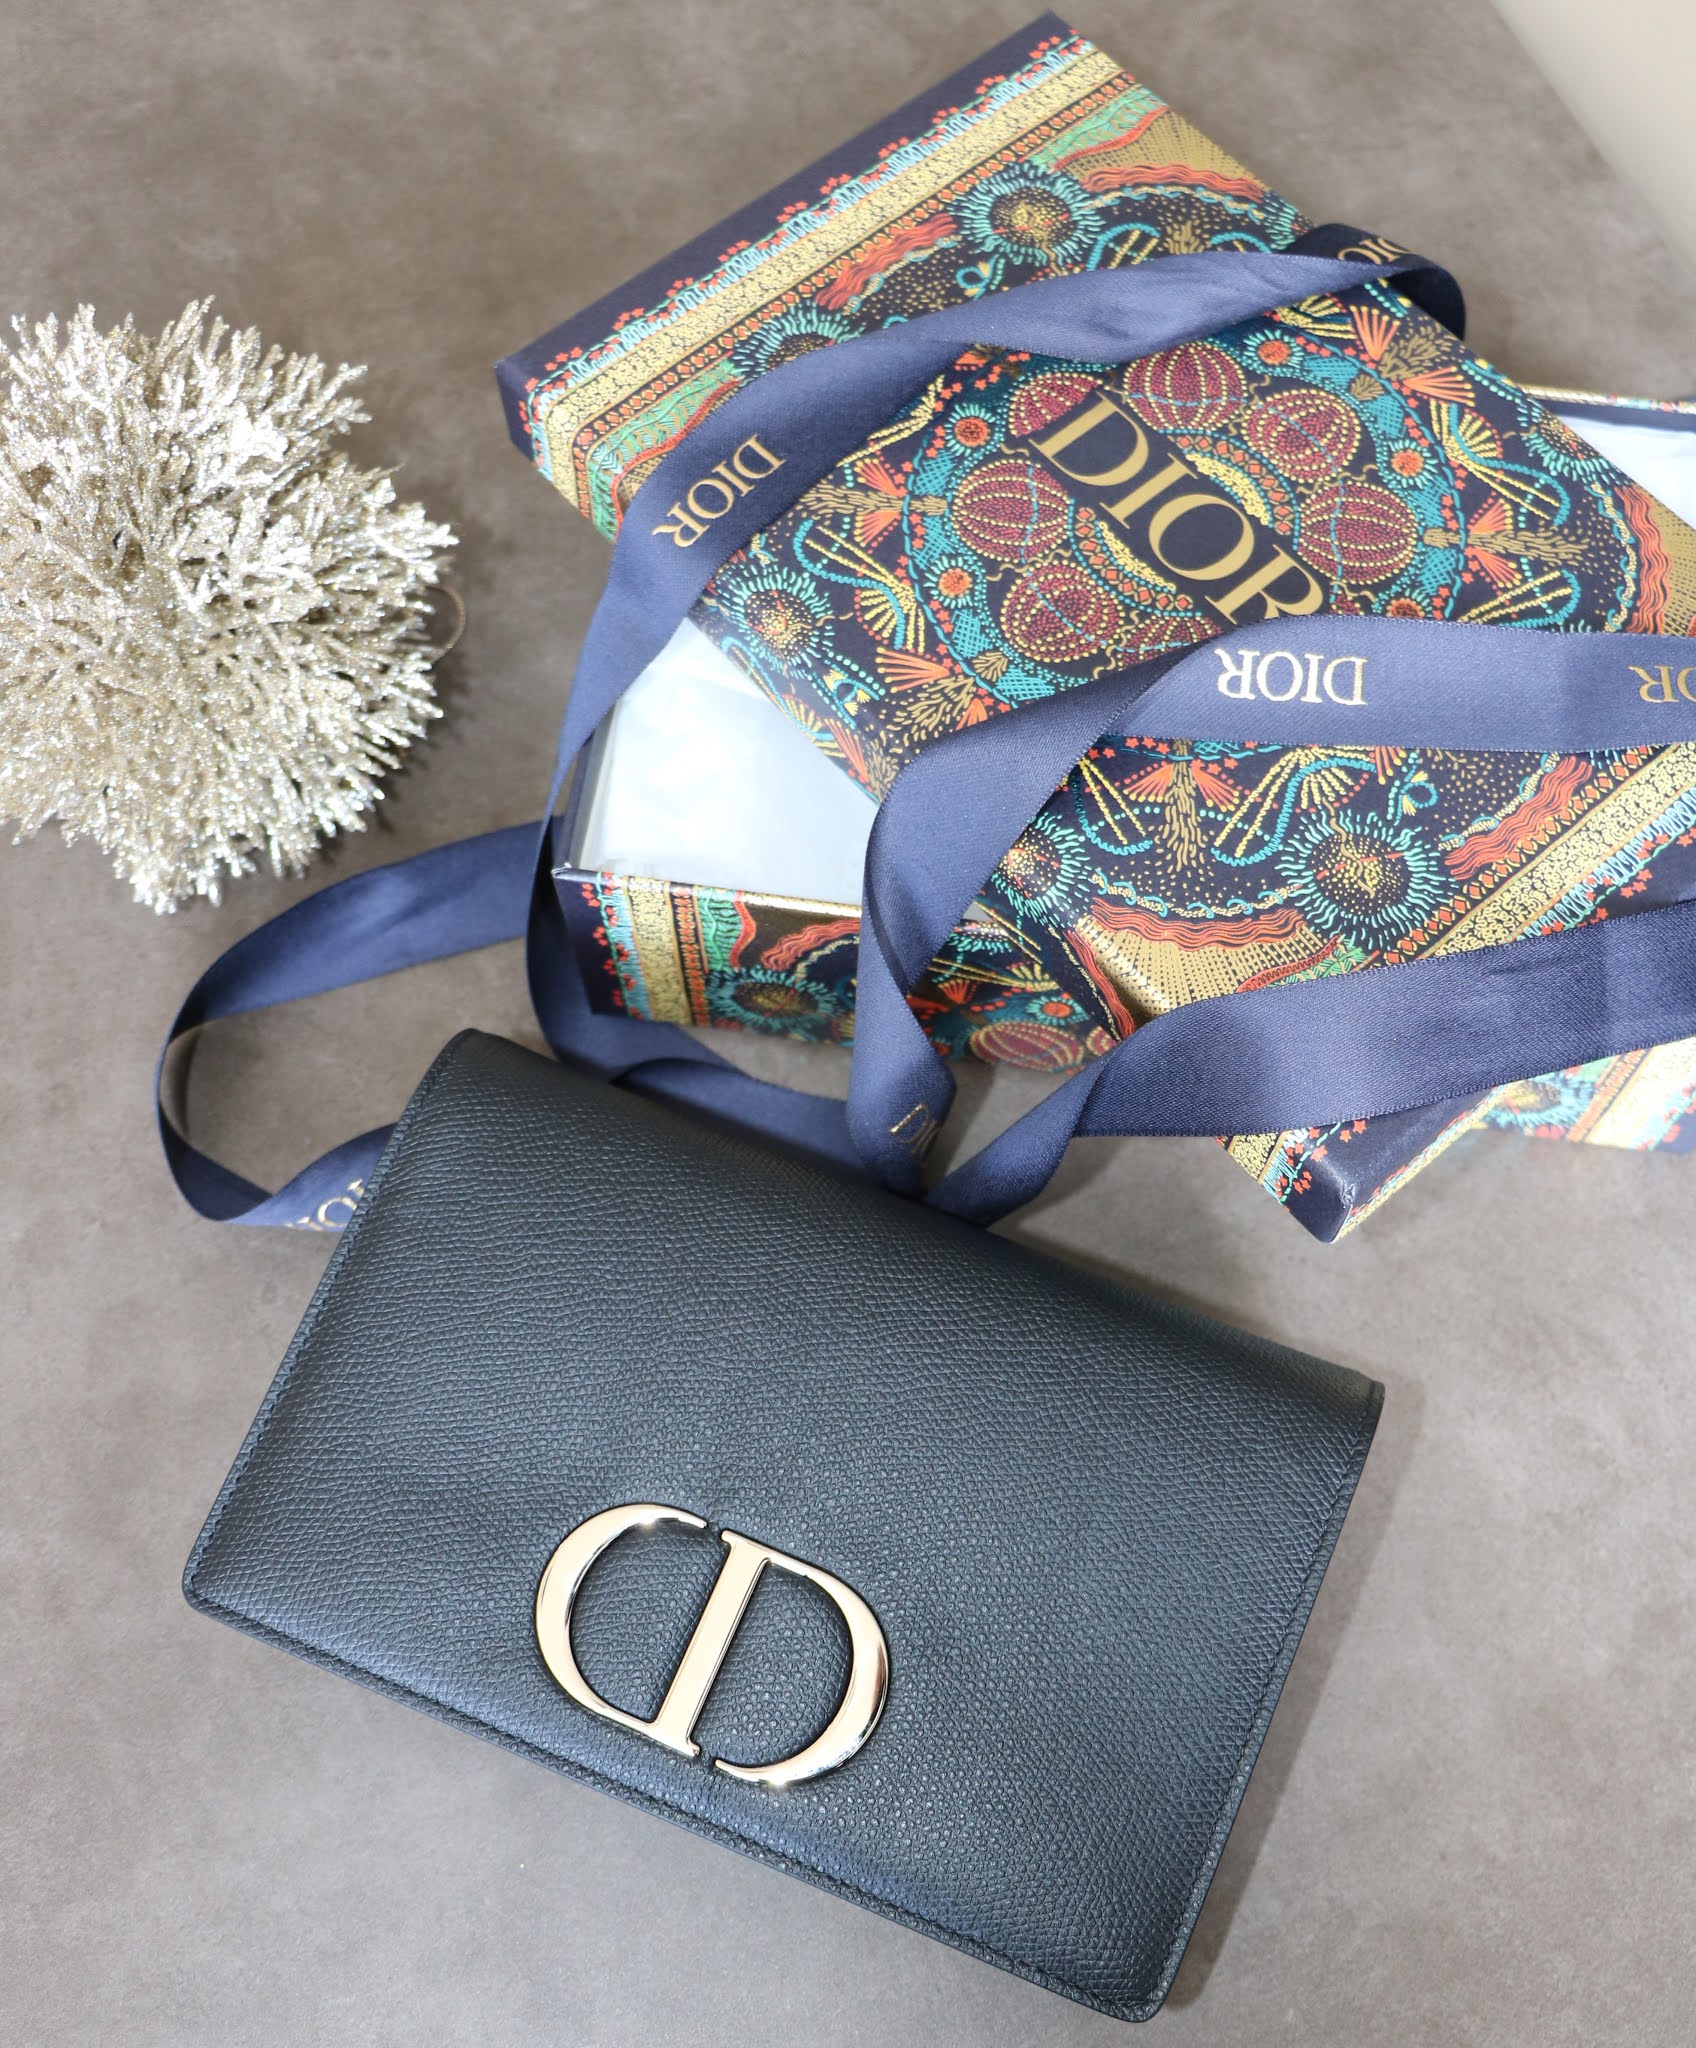 First Look: Unboxing the Gorgeous Louis Vuitton Diane Bag